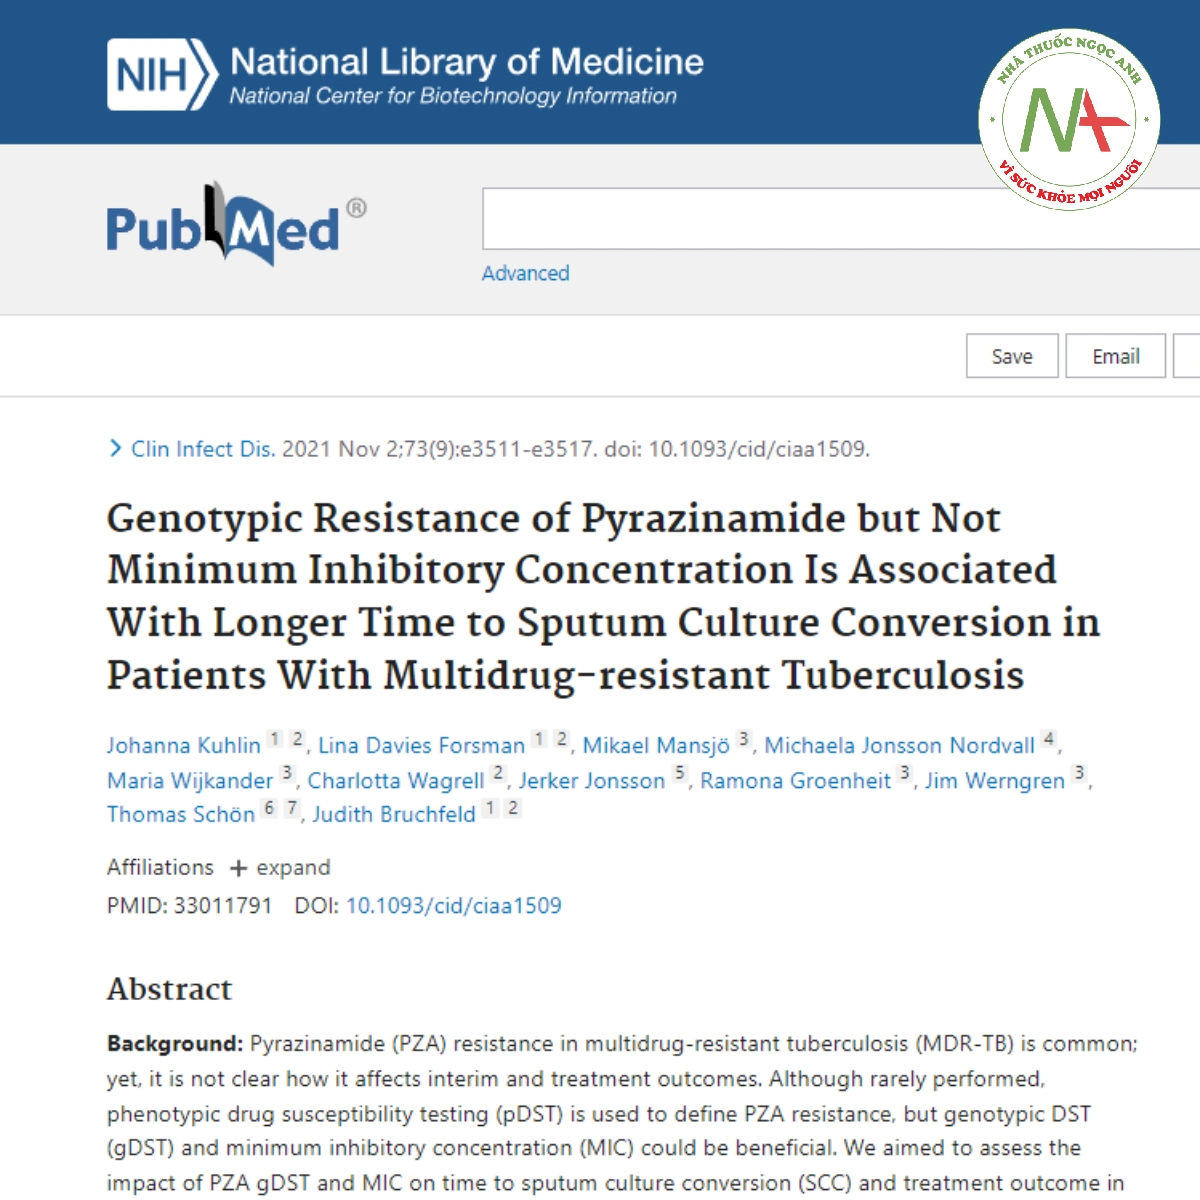 Genotypic Resistance of Pyrazinamide but Not Minimum Inhibitory Concentration Is Associated With Longer Time to Sputum Culture Conversion in Patients With Multidrug-resistant Tuberculosis